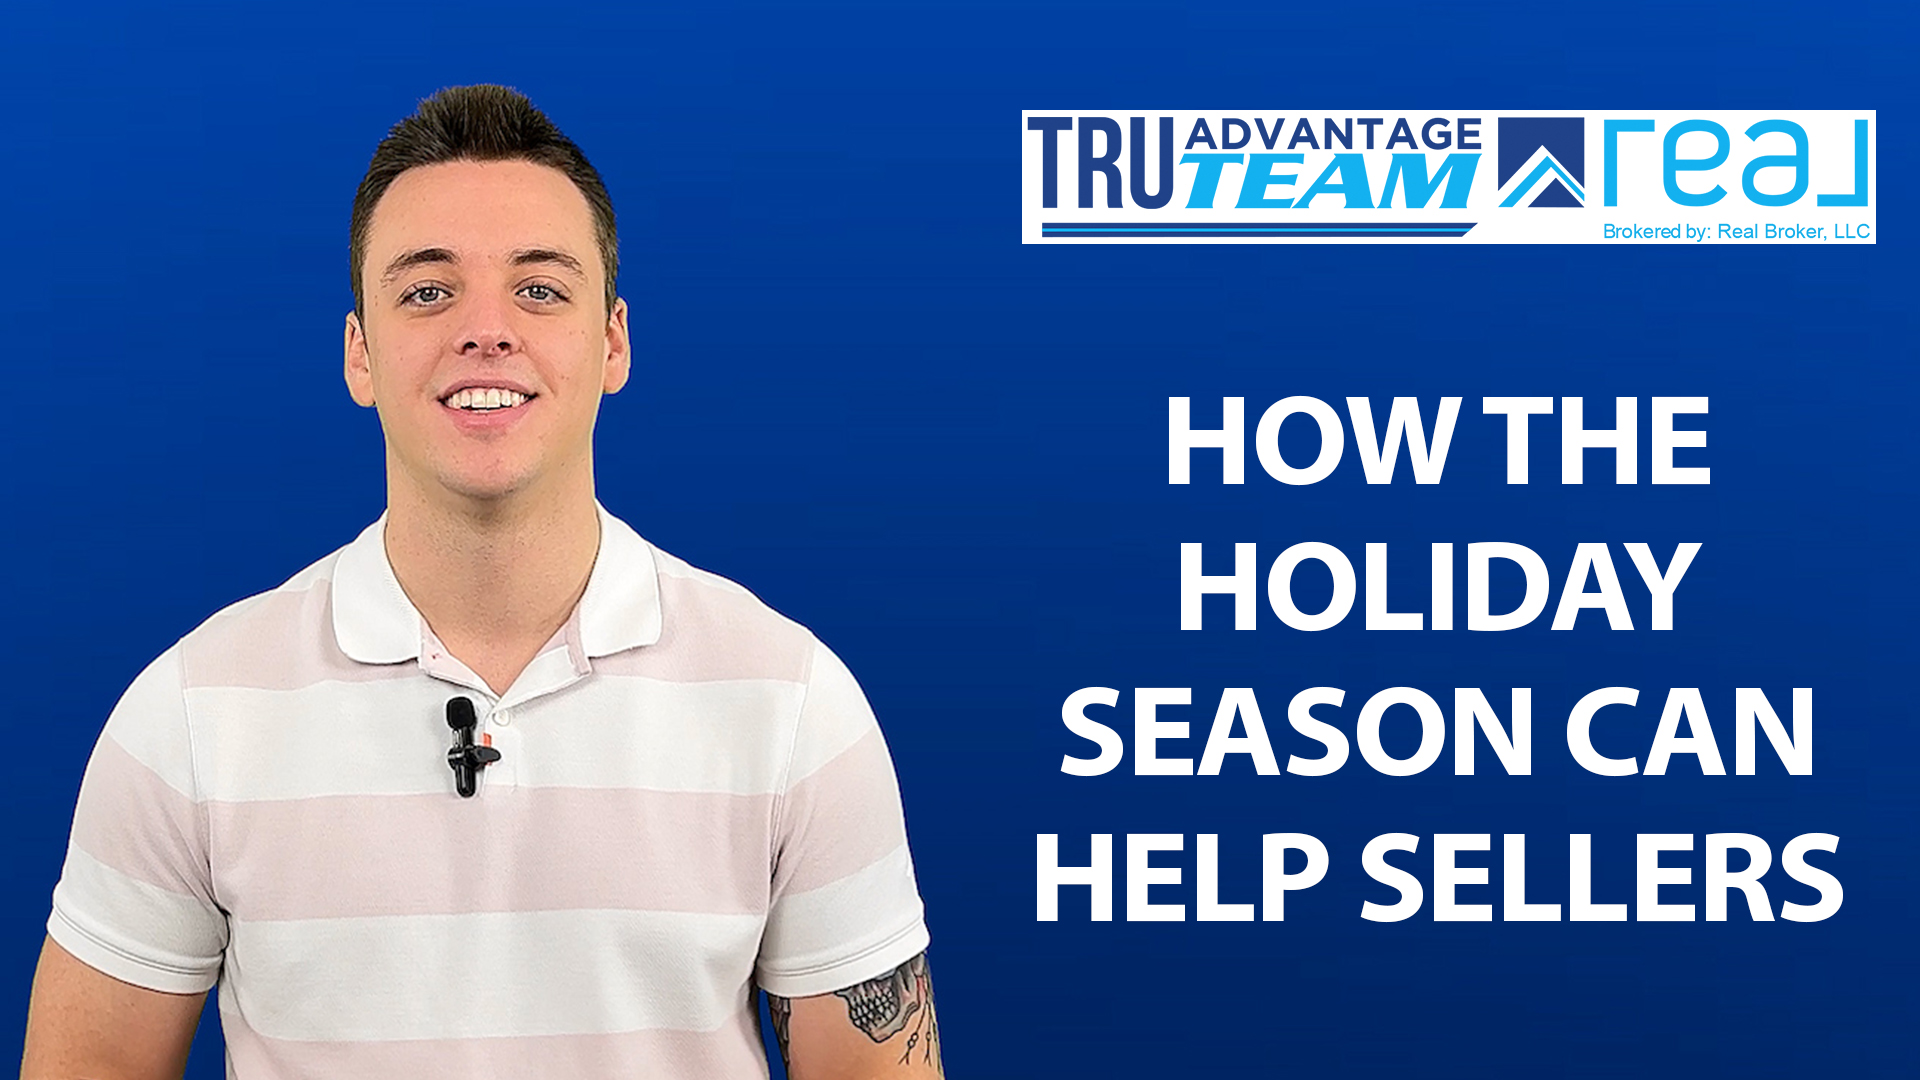 The Benefits of Selling During the Holidays